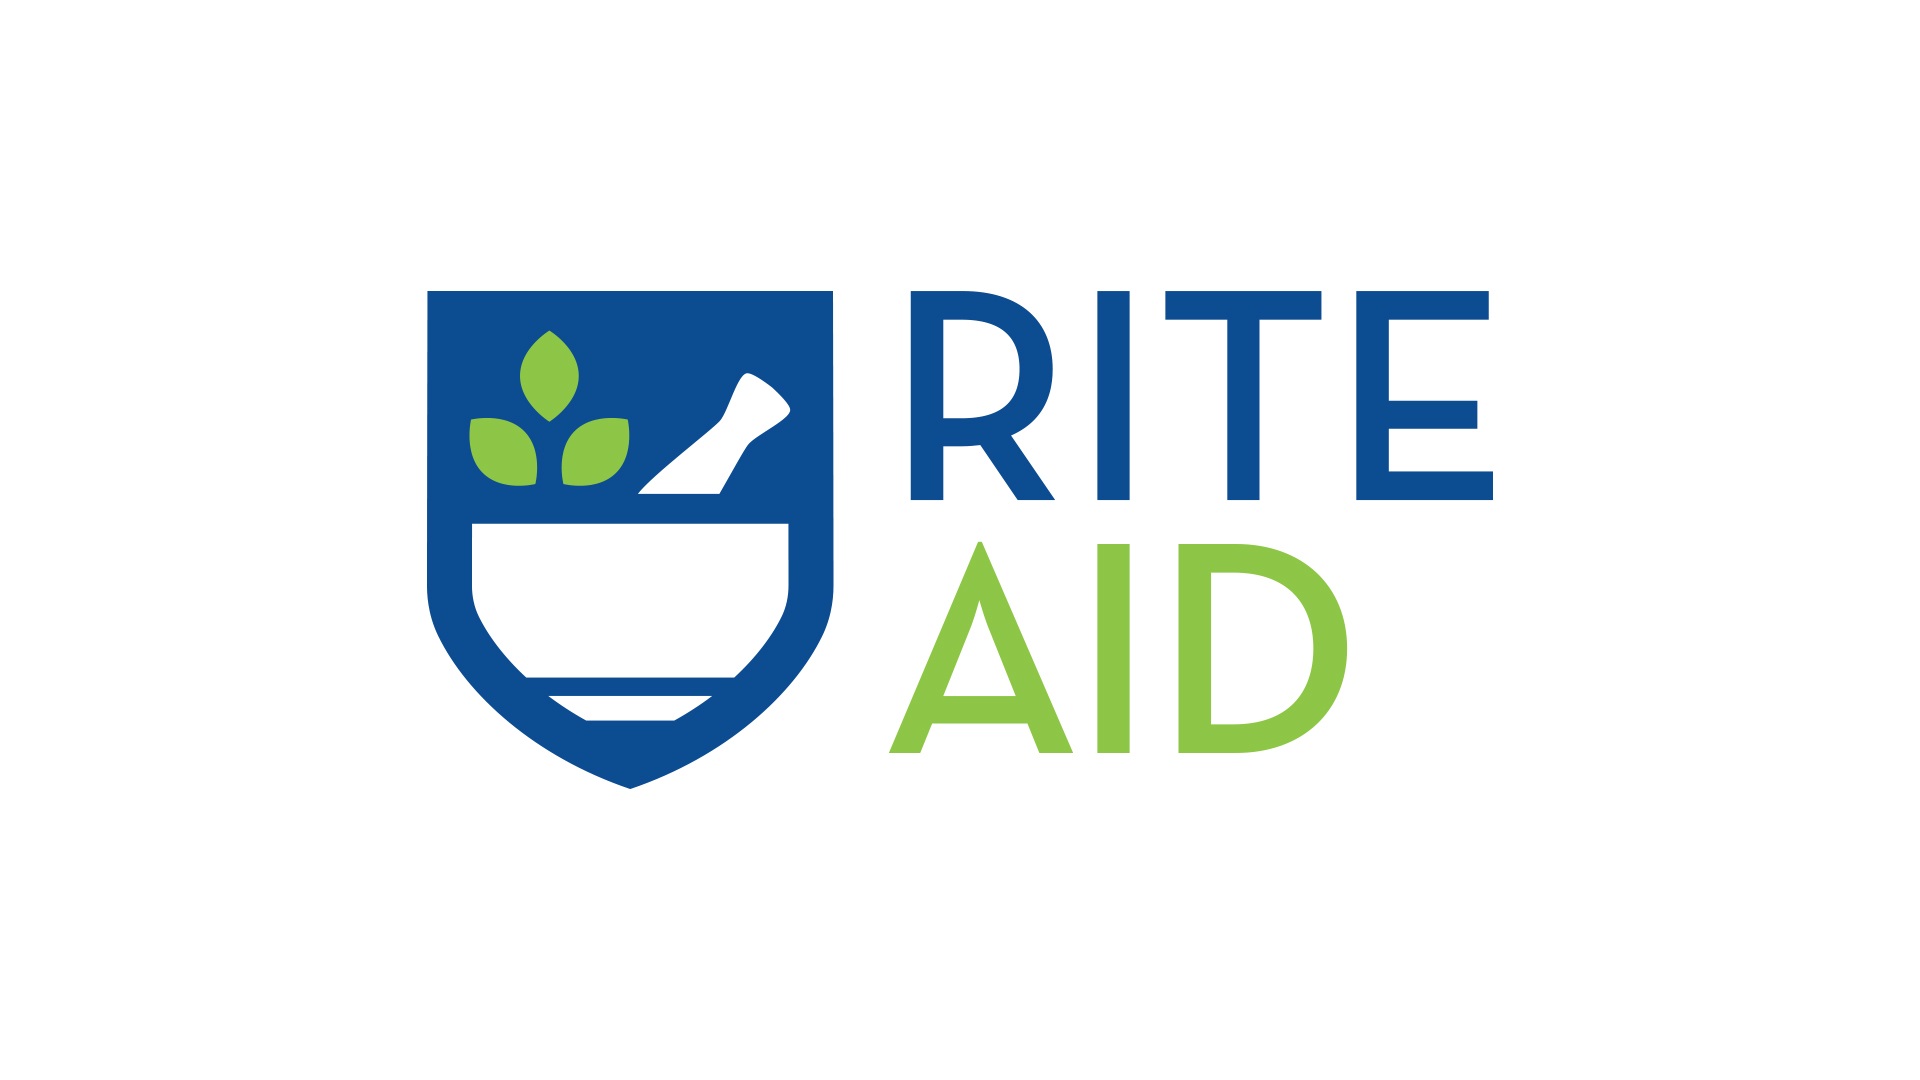 It is a new day at Rite Aid' Aid unveils new logo